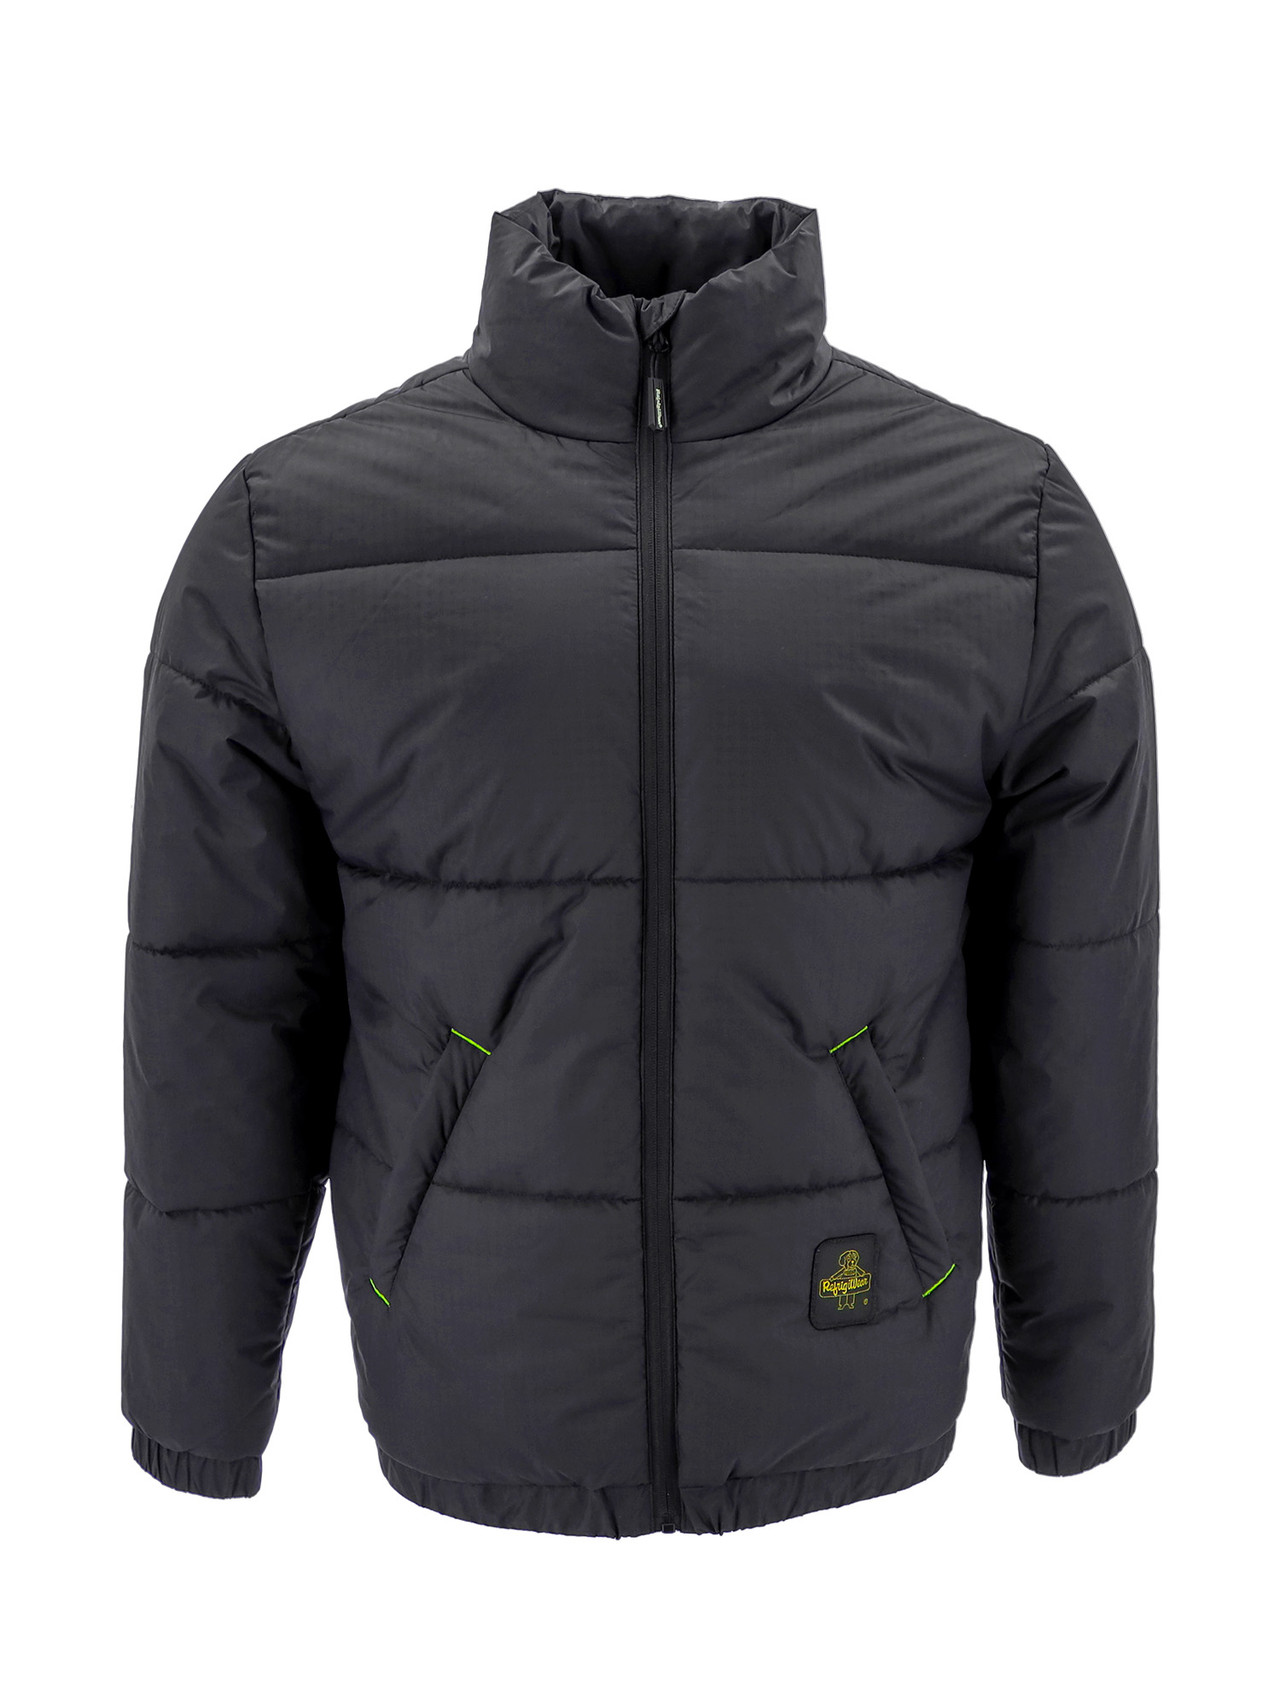 HOW AND WHY TO CHOOSE A PUFFER JACKET - RefrigiWear